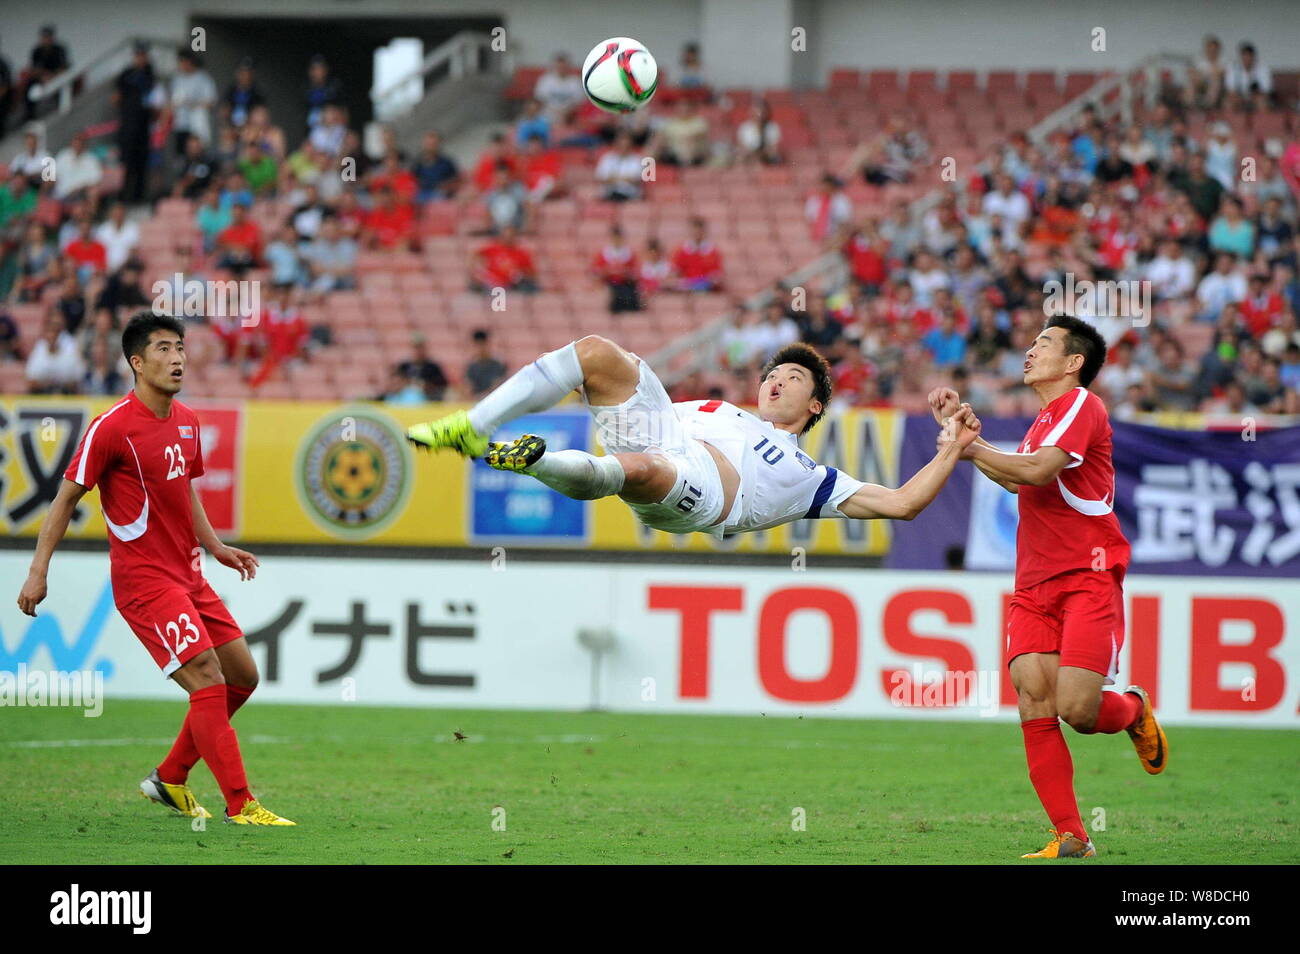 Ro Hak-su of North Korea, right, challenges Lee Jong-ho of South Korea, center, during their soccer match of the Men's East Asian Cup 2015 in Wuhan ci Stock Photo